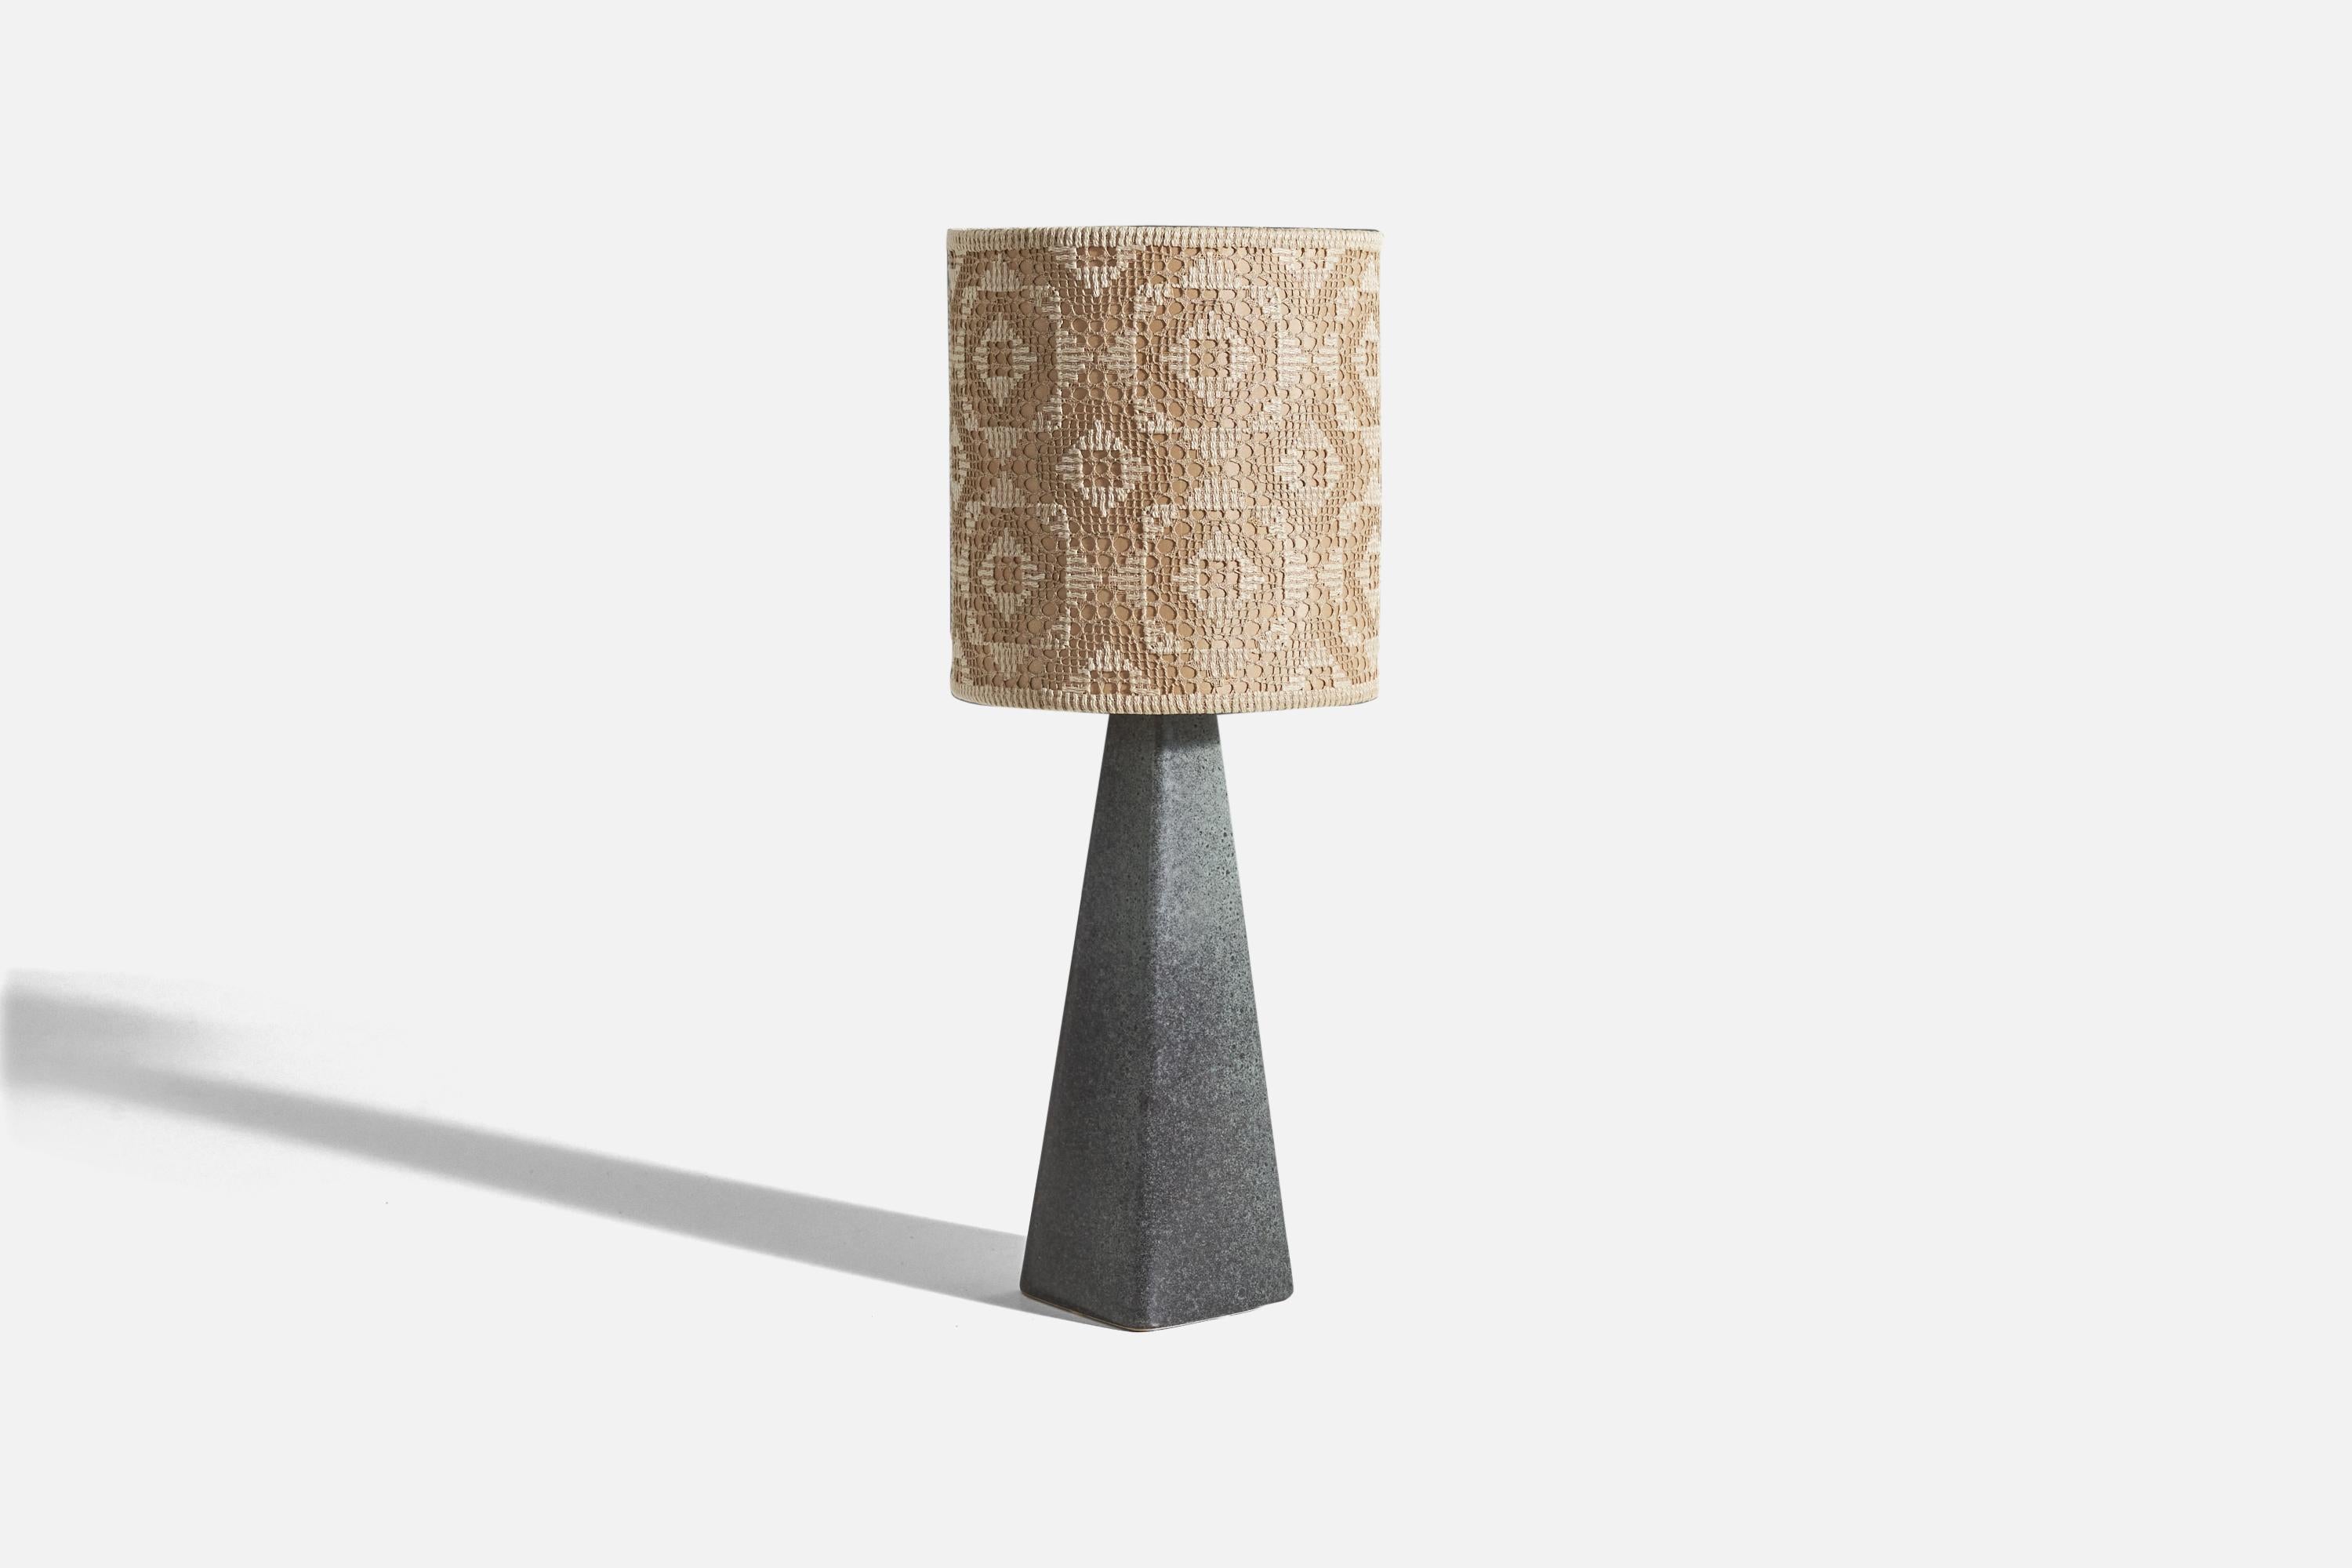 A gray glazed stoneware and embroidered fabric table lamp designed and produced by a Danish designer, Denmark, c. 1960s.

Sold with lampshade. 
Dimensions of Lamp (inches) : 14.5 x 4.95 x 3.85 (Height x Width x Depth)
Dimensions of Shade (inches) :